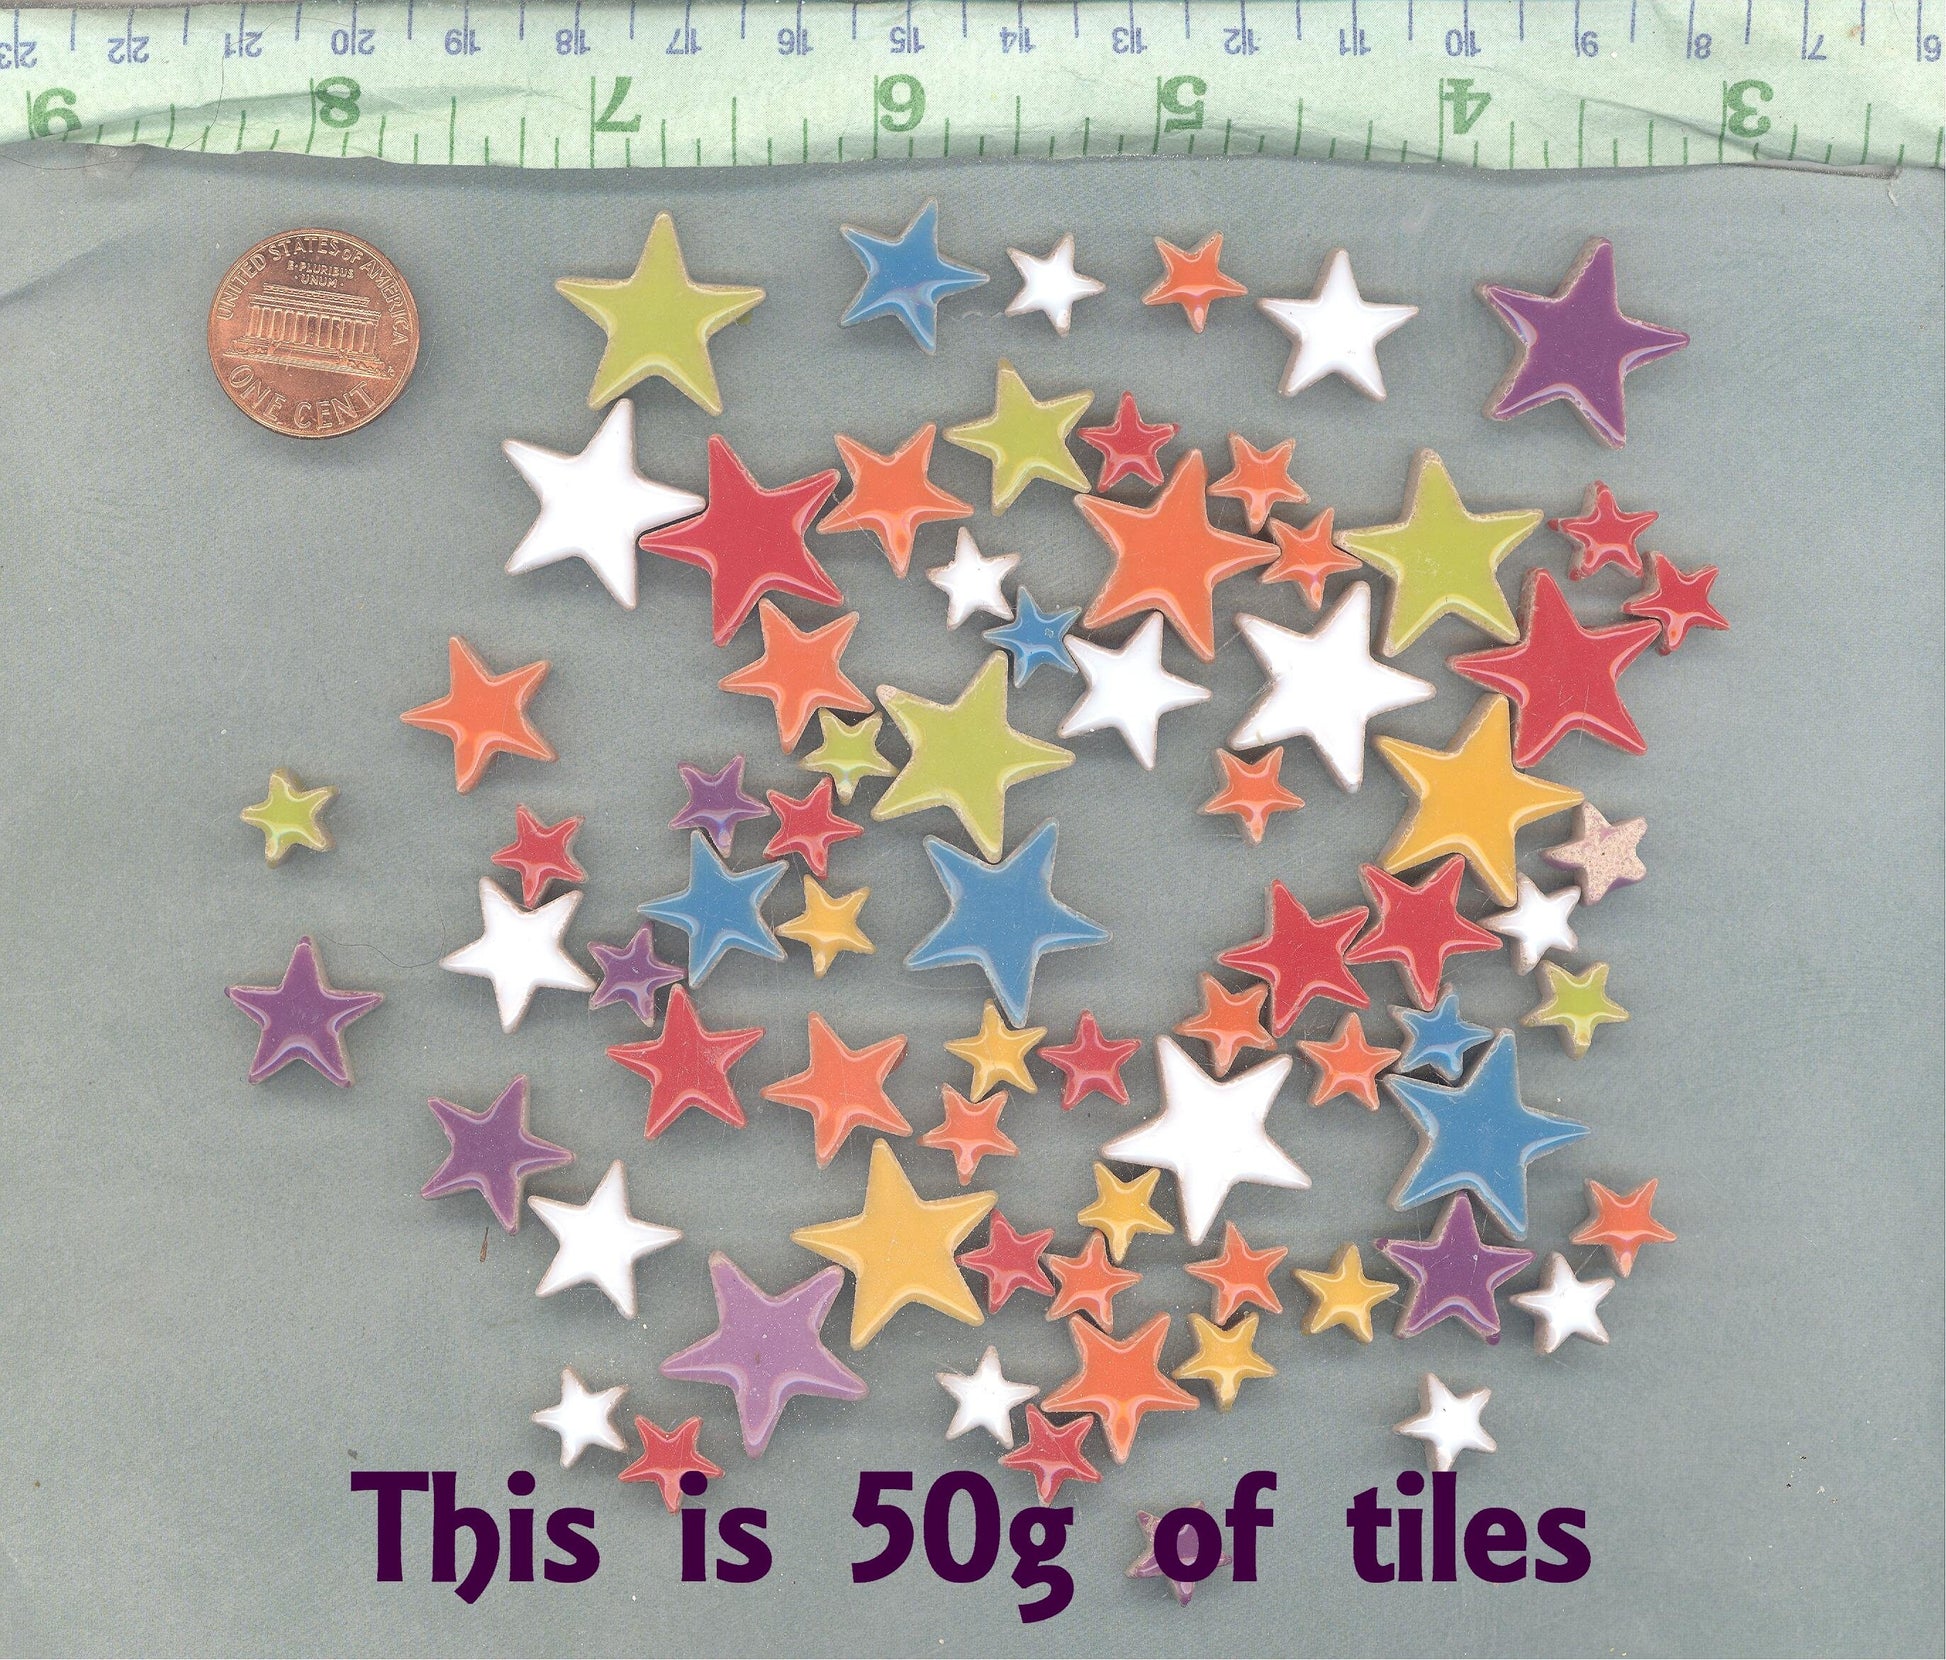 Colorful Stars Mosaic Tiles - 50g Ceramic in Mix of 3 Sizes - 20mm, 15mm, 10mm - Assorted Colors